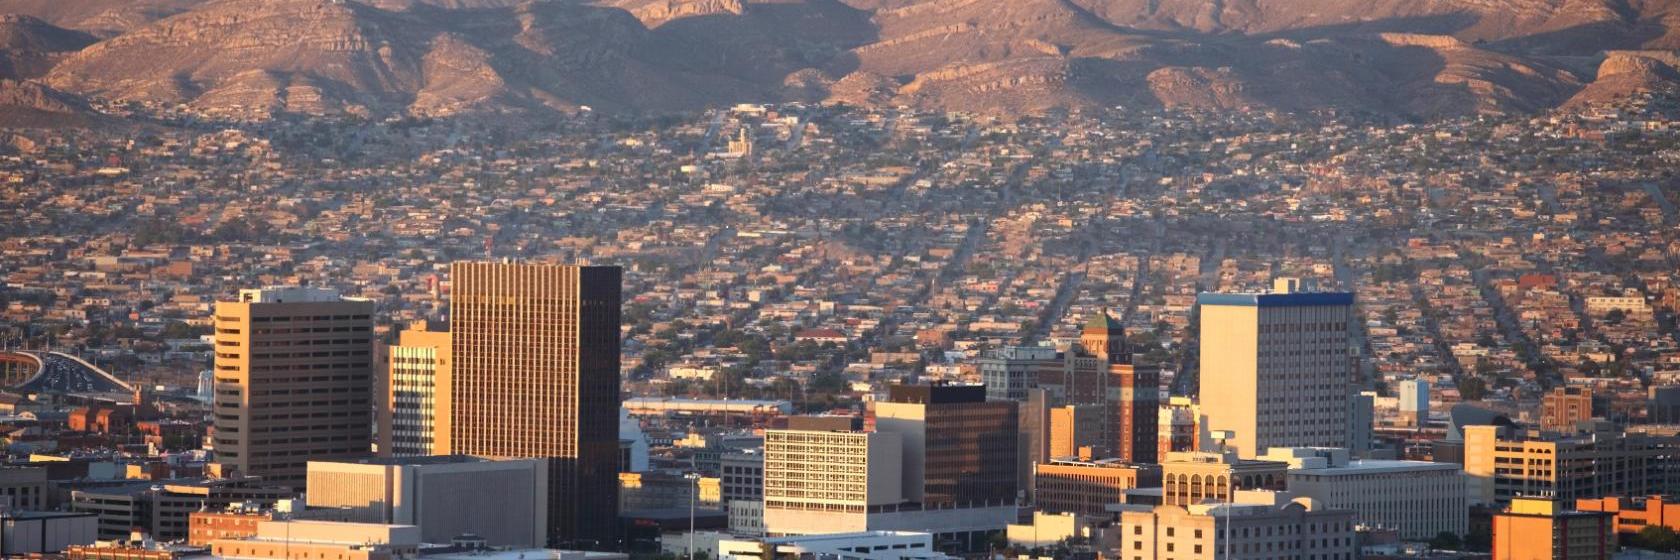 99 hotels in El Paso, United States of America.